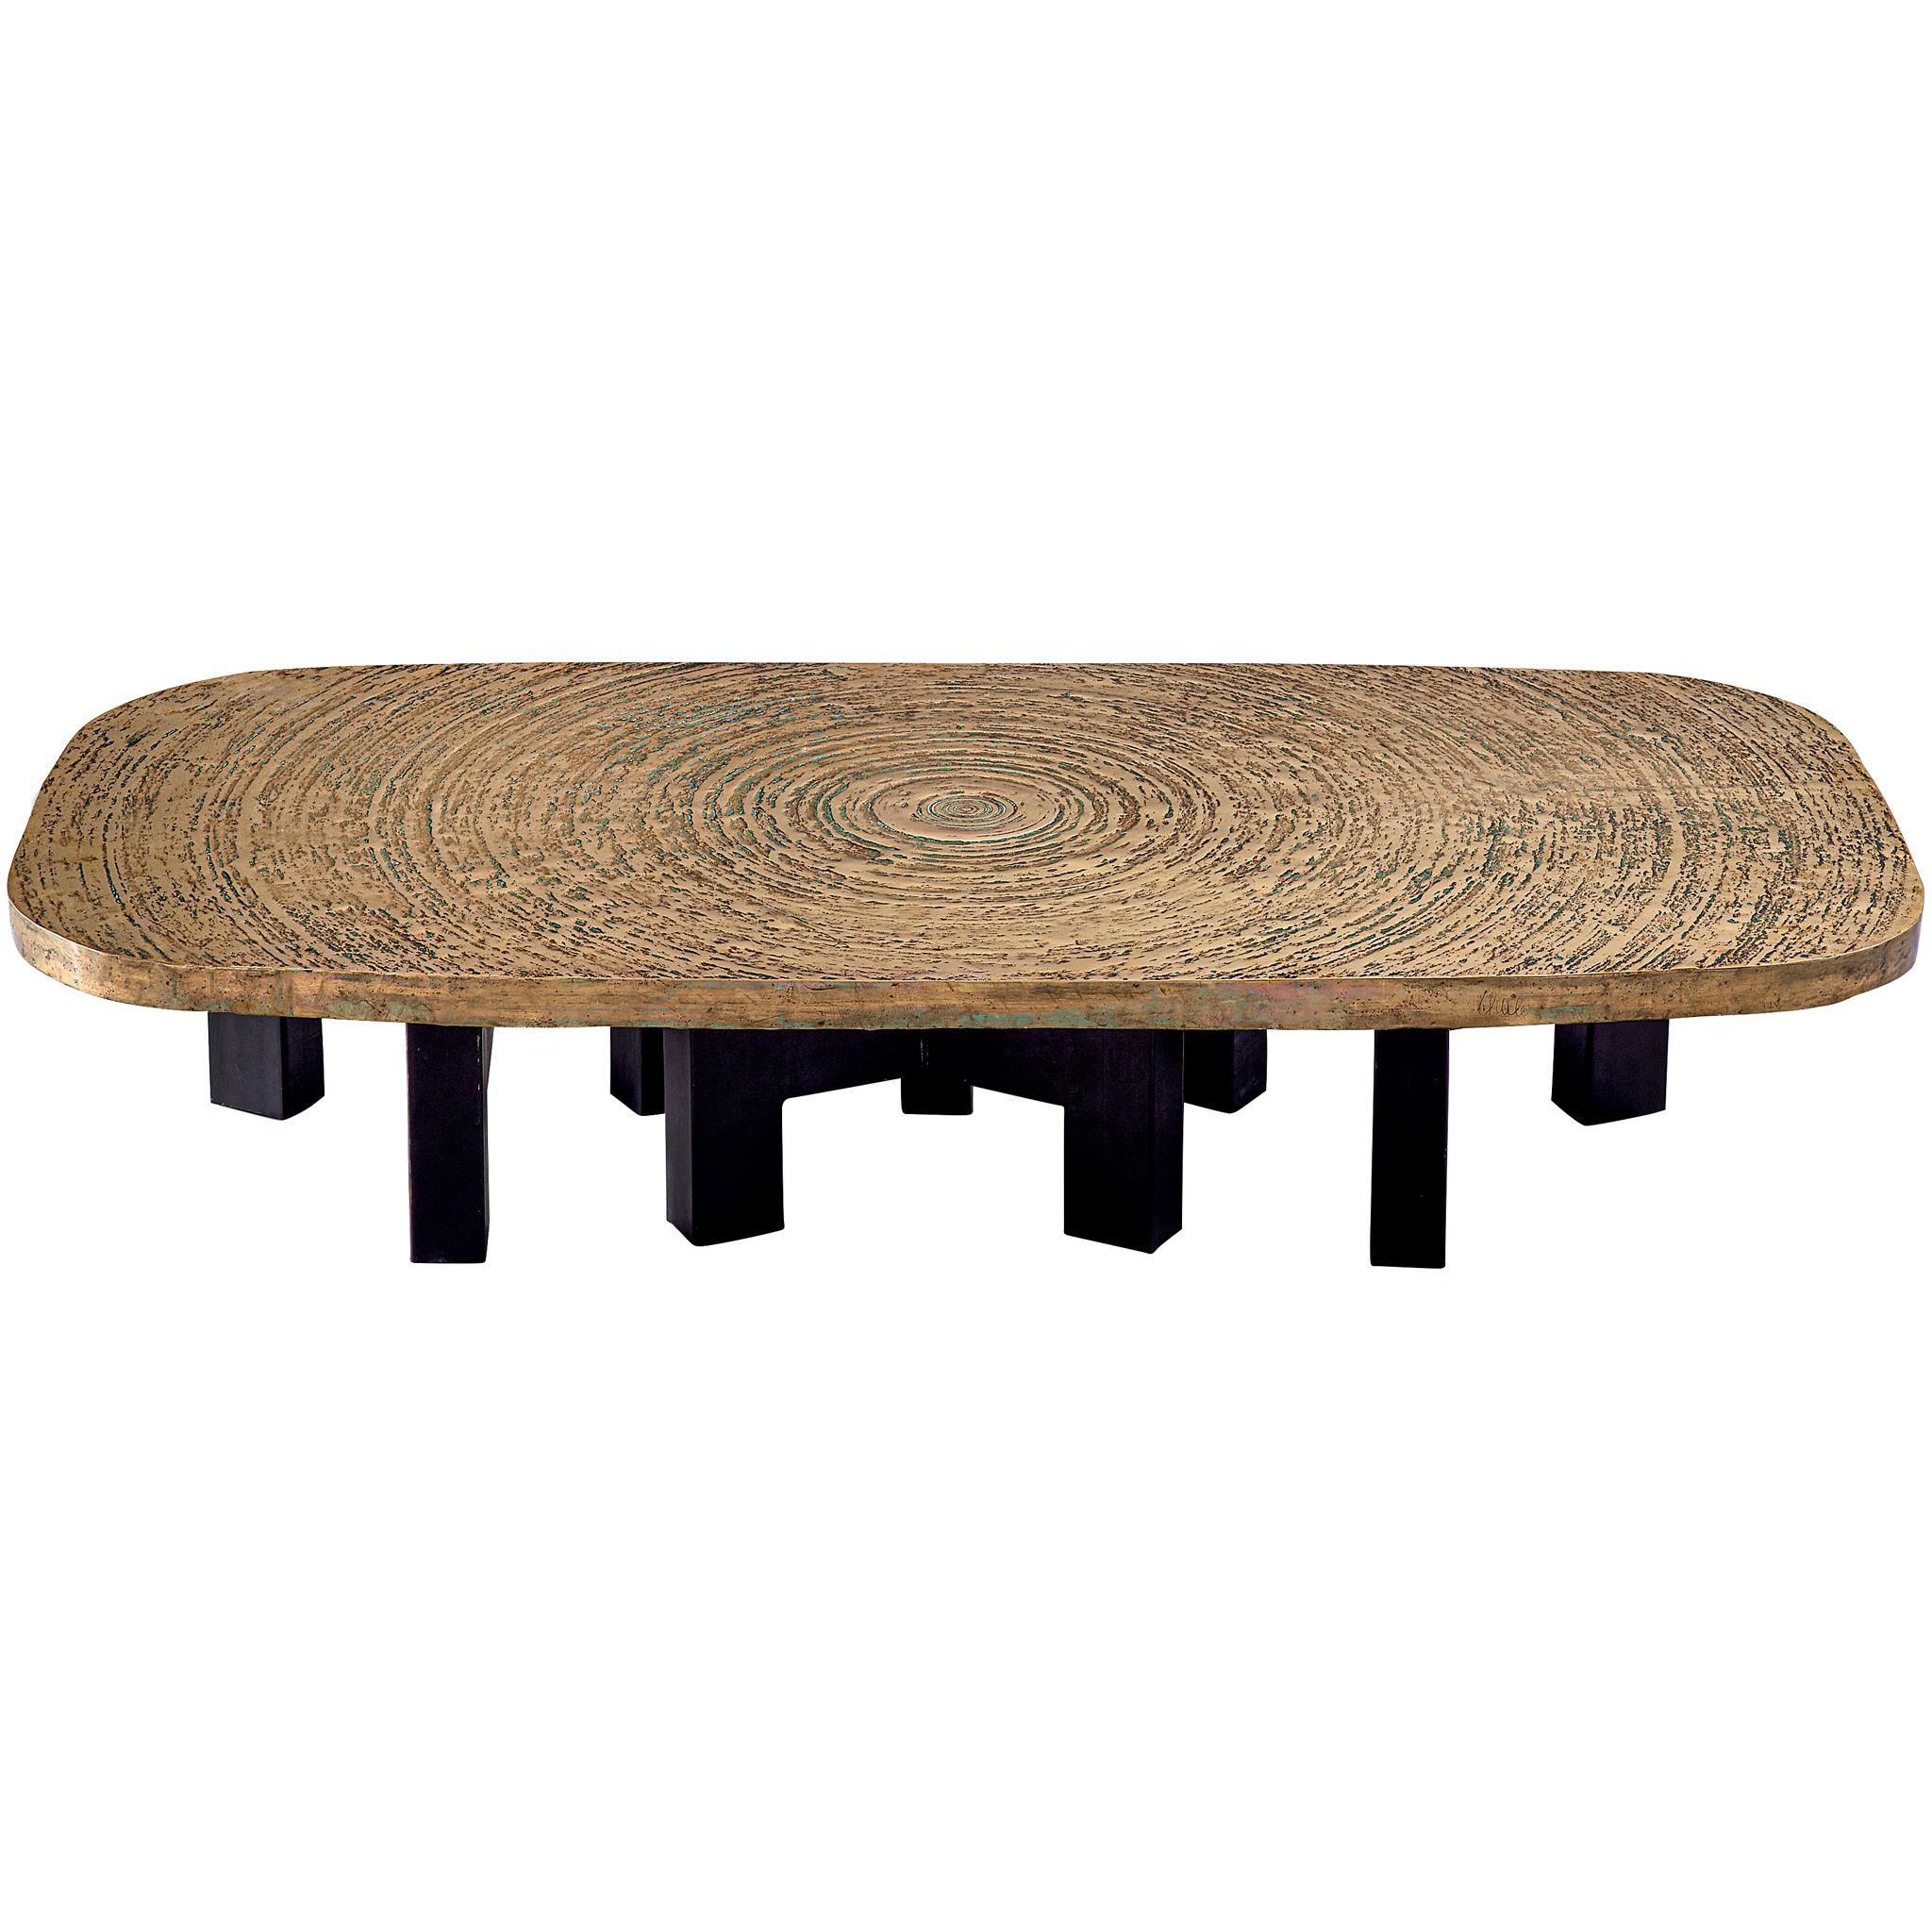 Early Ado Chale 'Goutte d'Eau' Coffee Table in Patinated Bronze